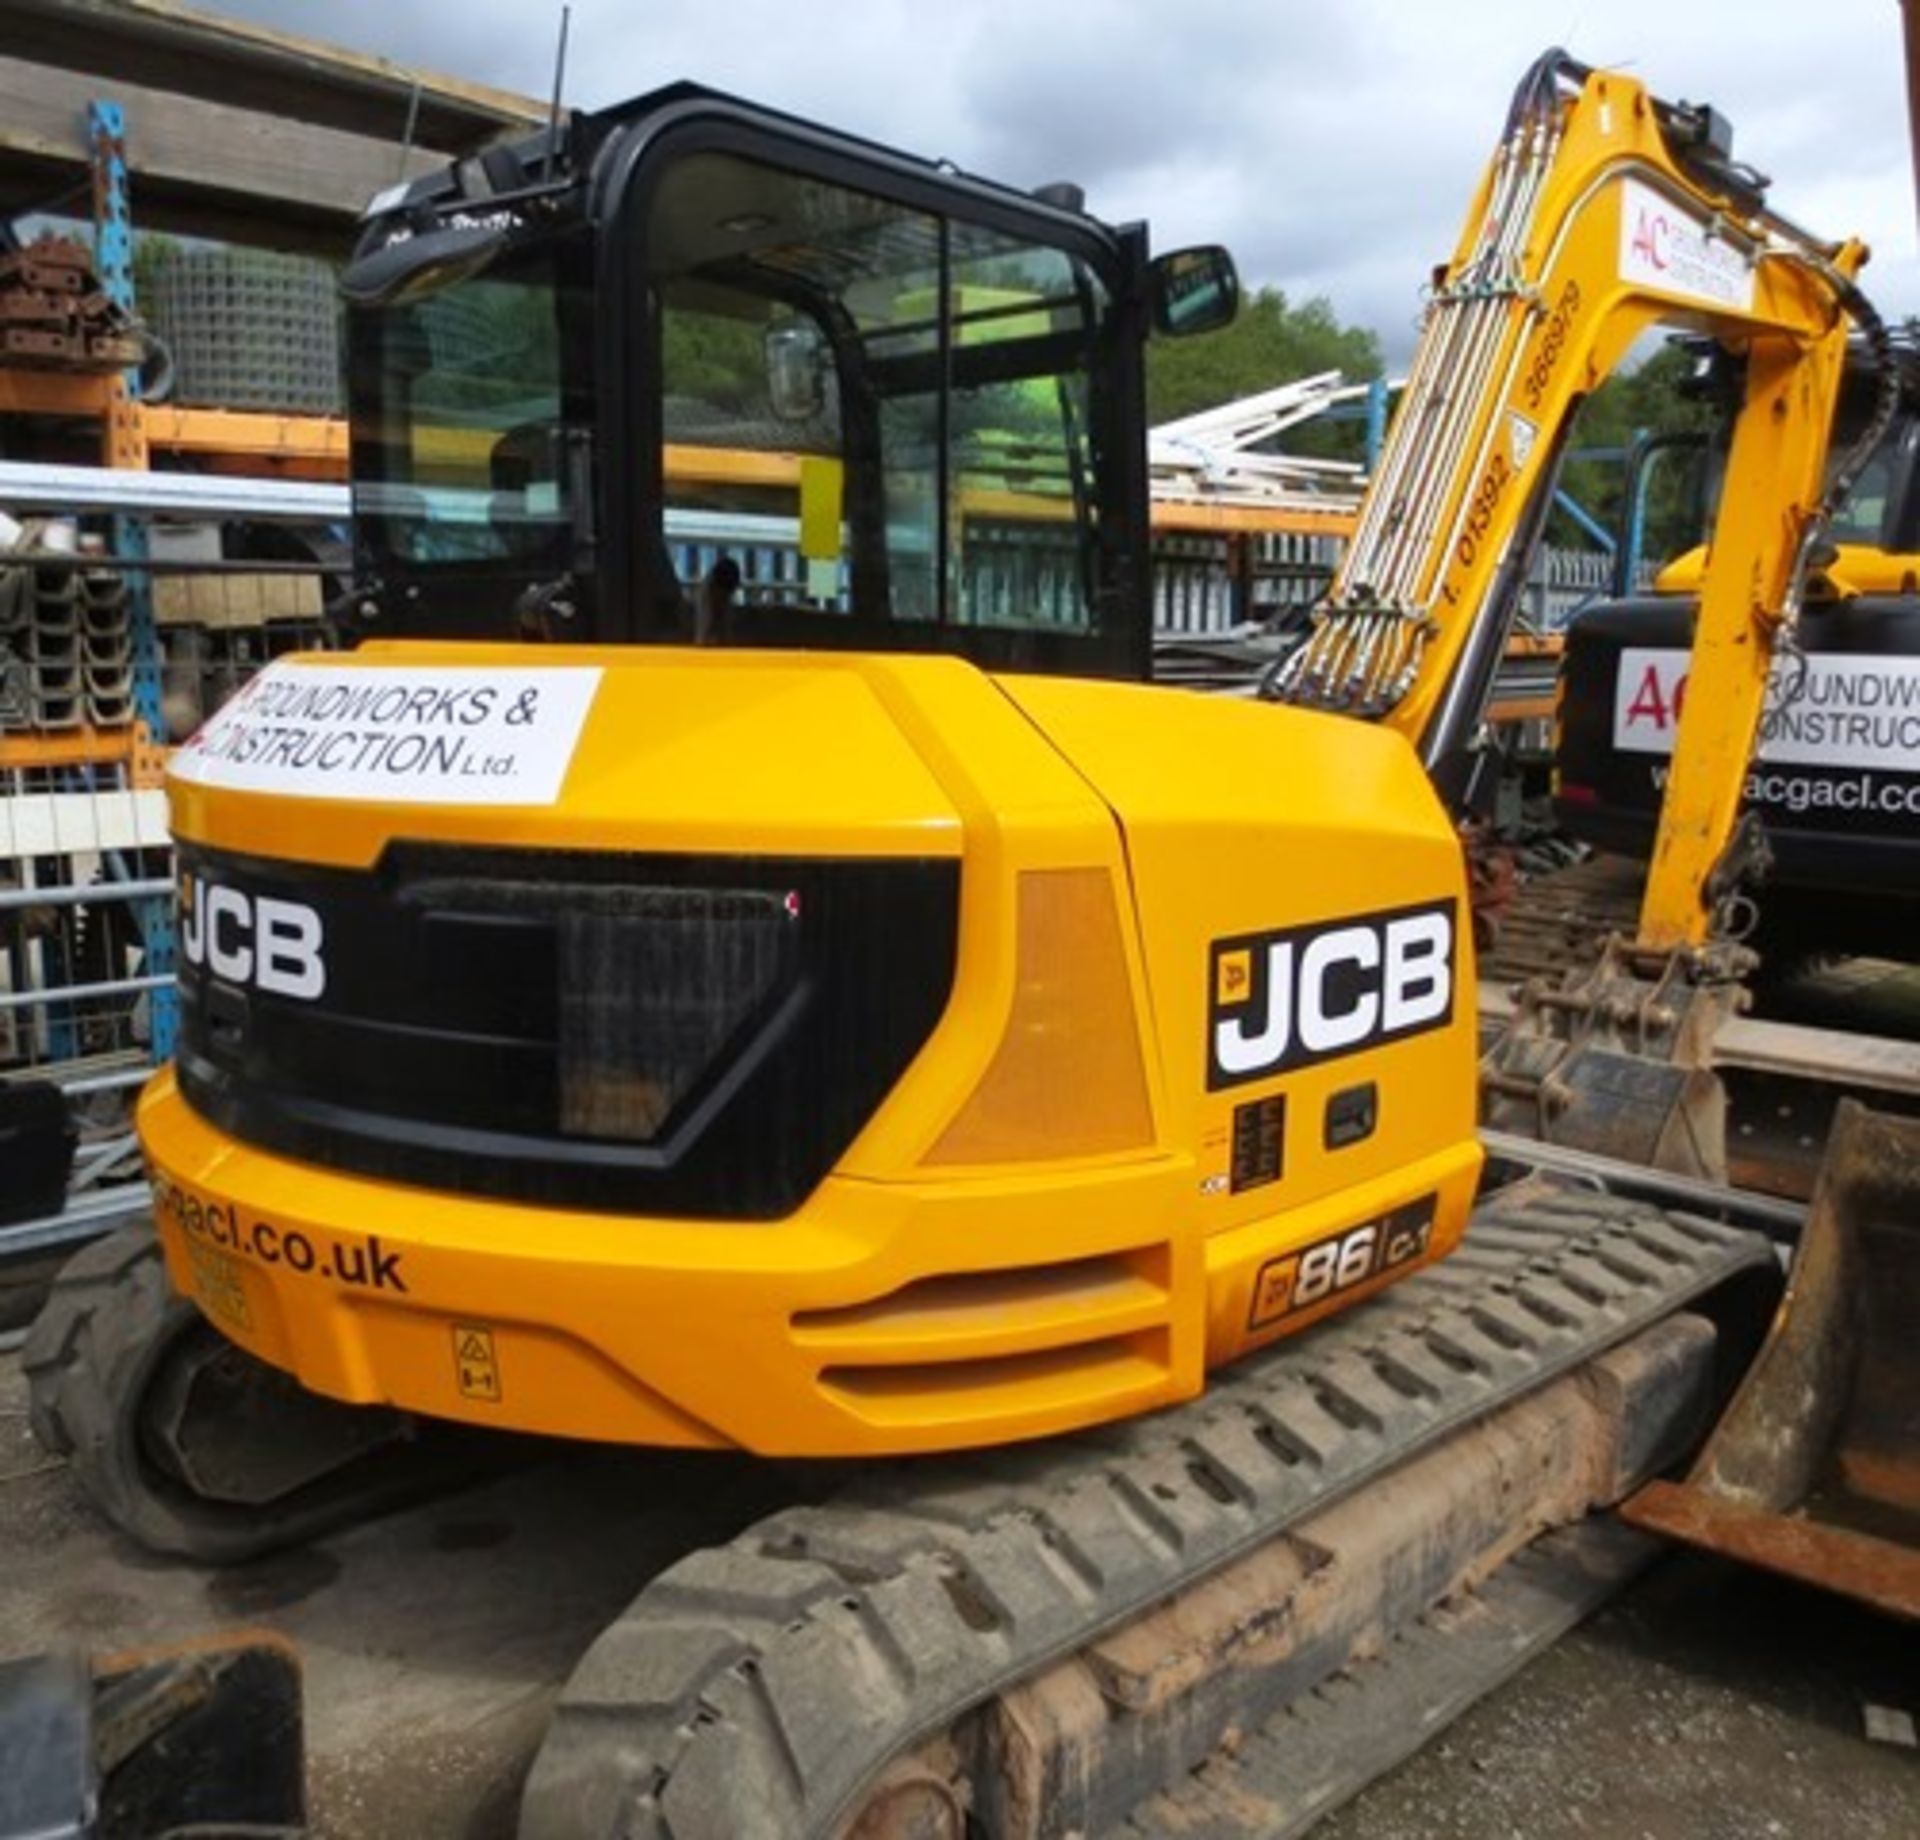 JCB 86C-1 rubber tracked midi hydraulic excavator with front dozer, product ID No: JCB086C1A02249723 - Image 7 of 19